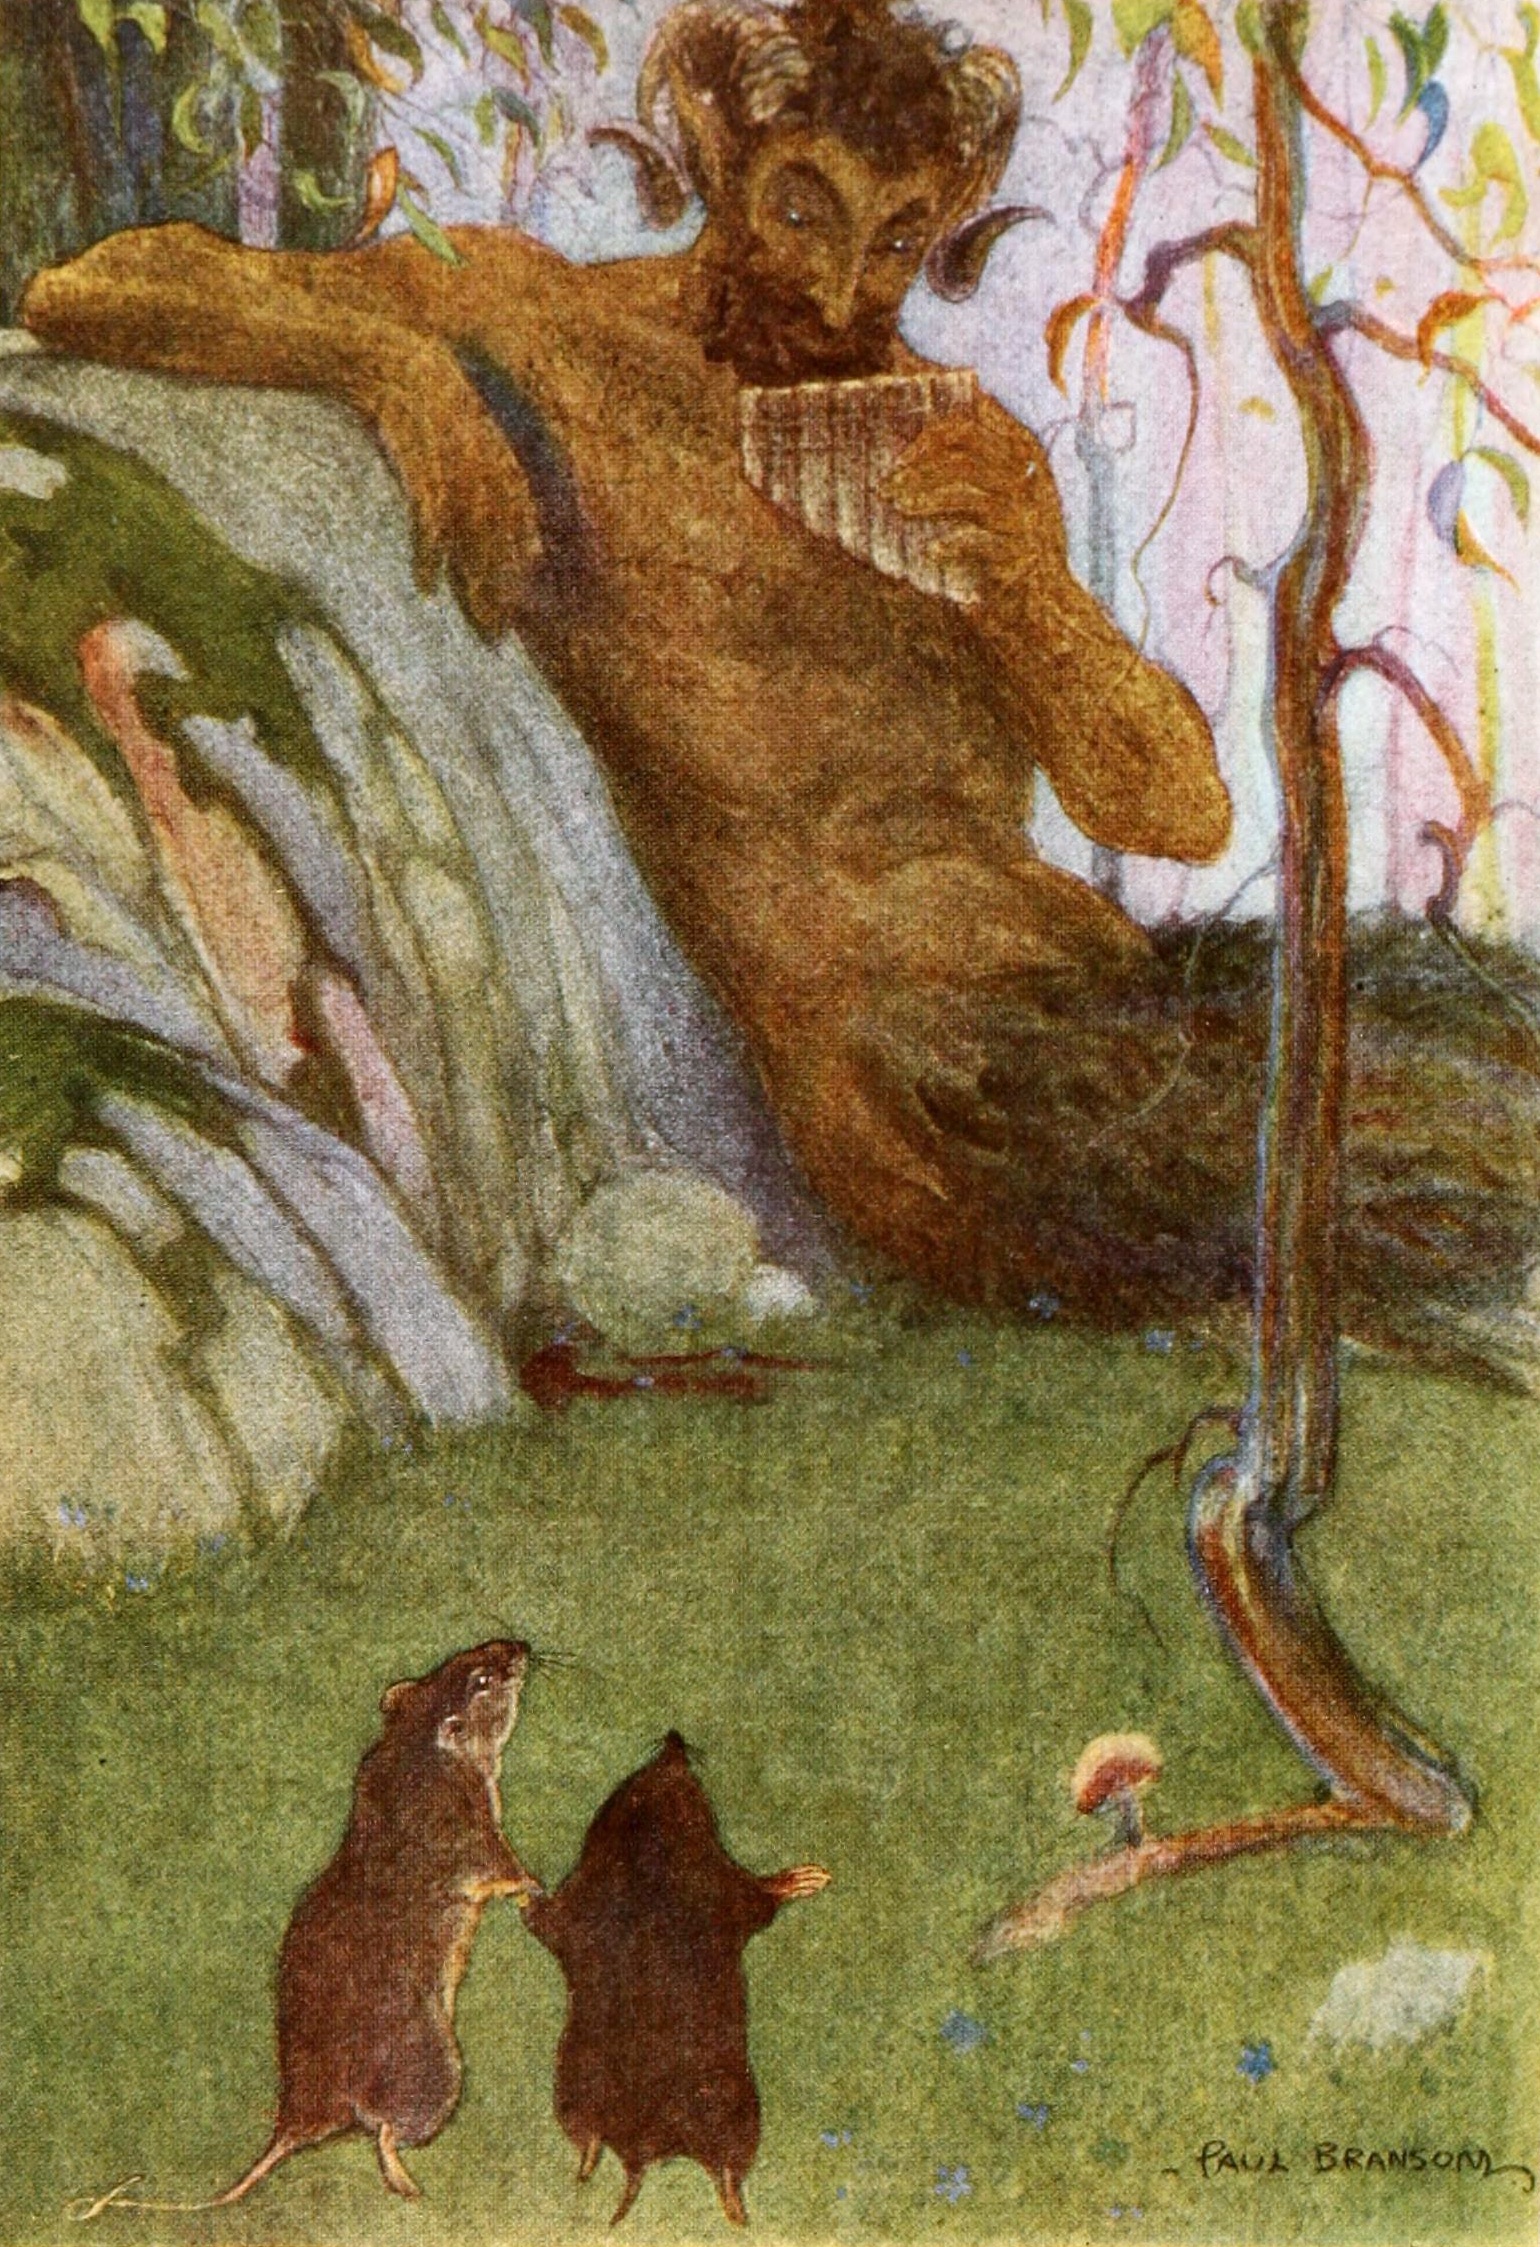 A centaur sits in a forest and plays a wind instrument while two mice watch.